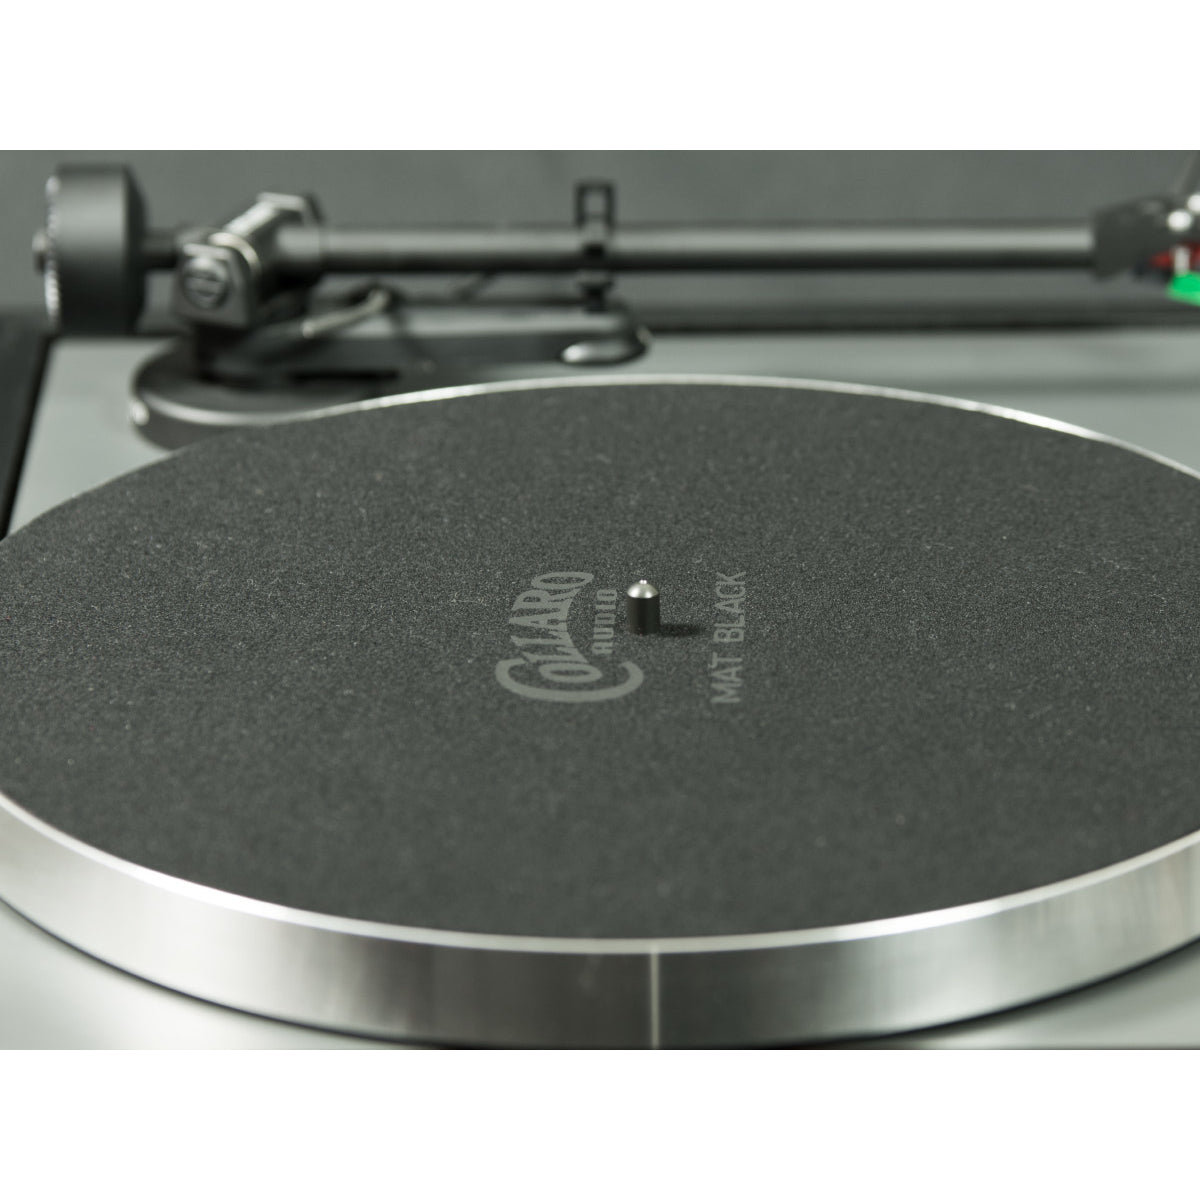 Collaro Mat Black Precision Cloth Turntable Mat (Hand Made in England)